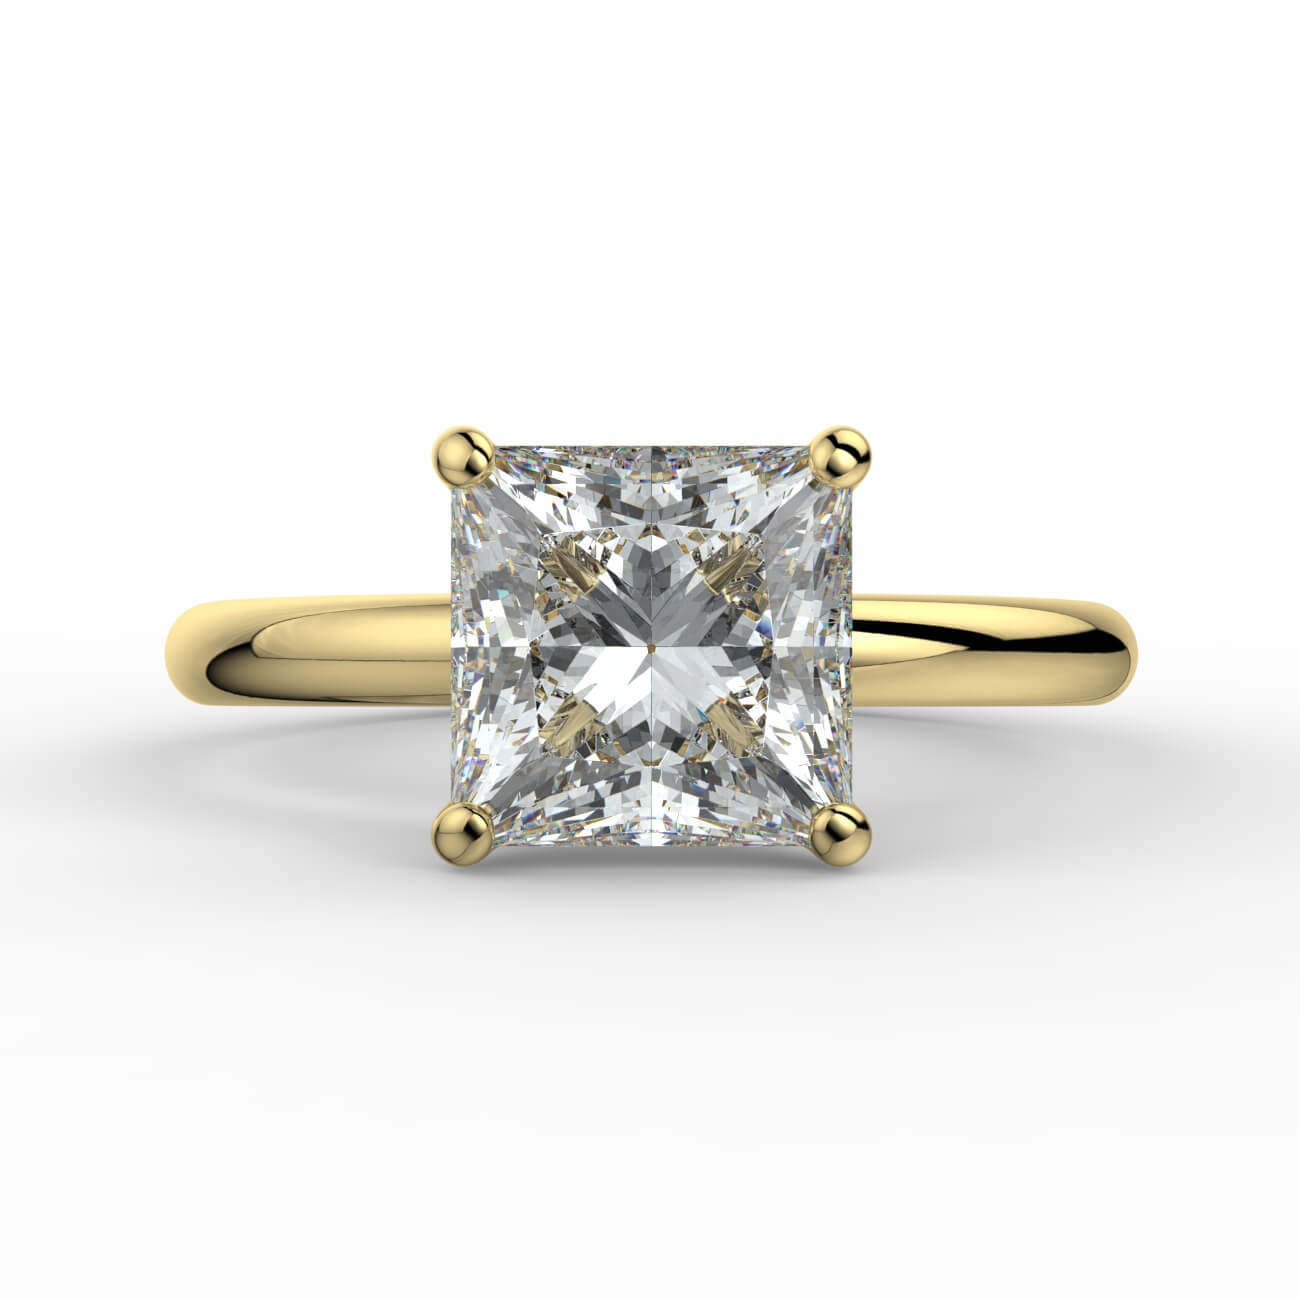 Comfort fit 4 claw princess cut solitaire diamond ring in yellow gold – Australian Diamond Network